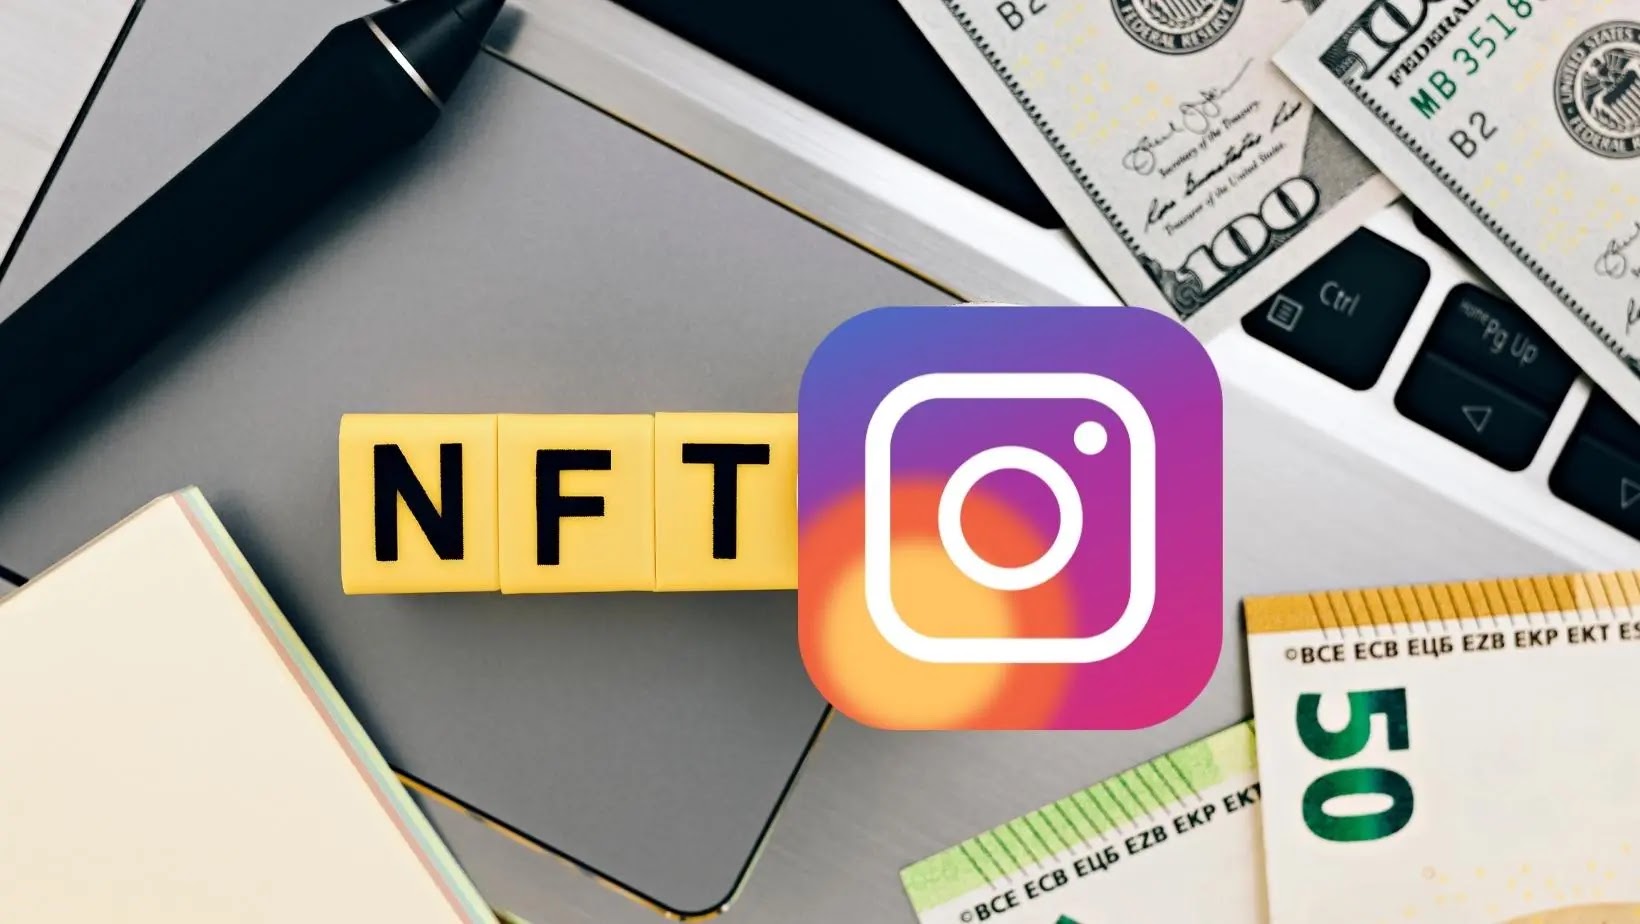 nft marketplace,marketplace,how to sell your solana nft on other marketplace,josh ryan instagram,nft in marketplace,nft art marketplace,cnft marketplace,what is the music business,nft marketplaces,what are nft marketplaces,what are nft marketplaces?,instagram,how to grow a following on instagram,how to use instagram,instagram nft,nft instagram,josh ryan instagram course,josh ryan instagram growth,how to sell nfts on instagram,how to grow on instagram